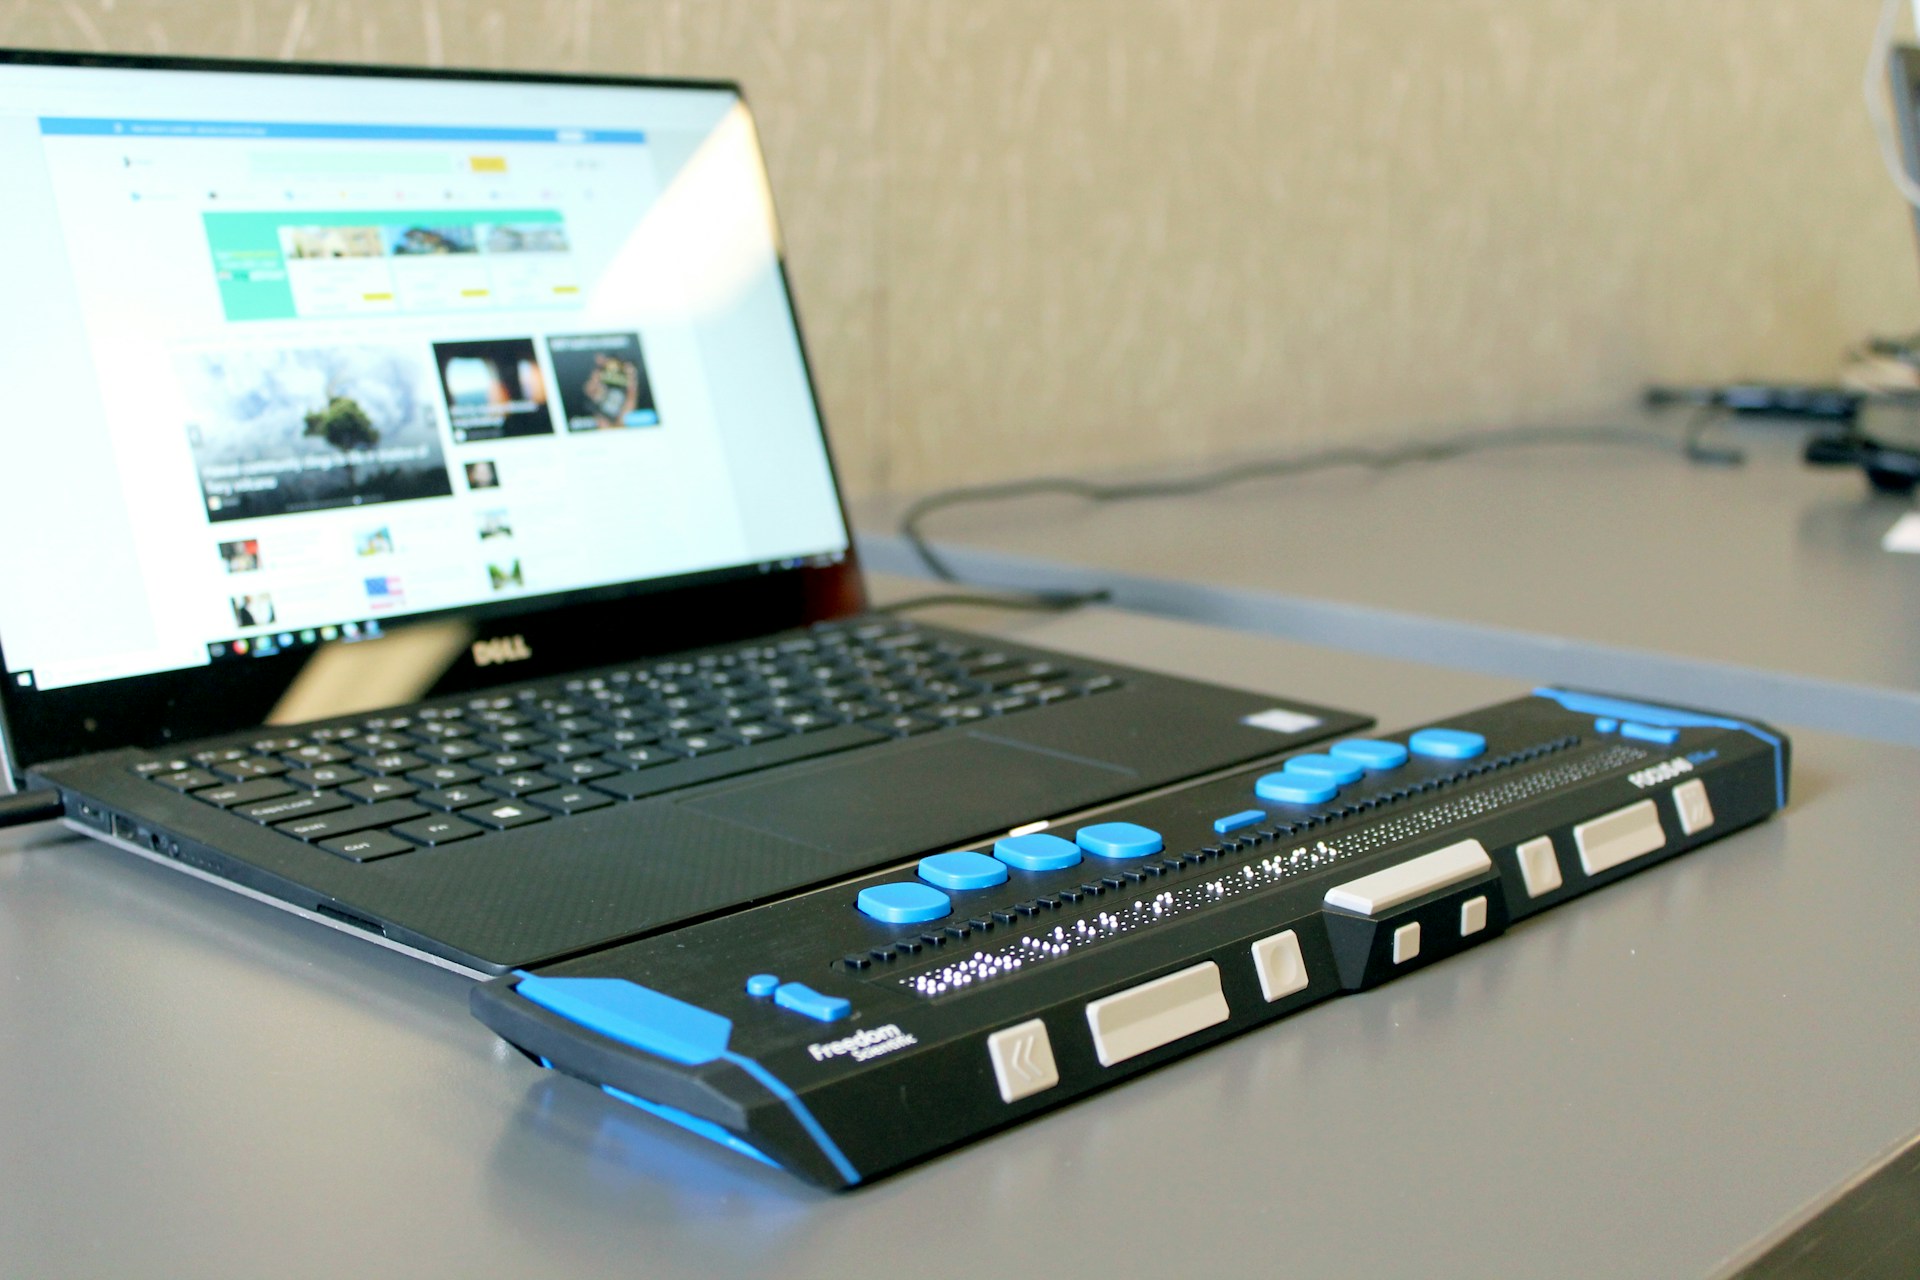 Refreshable Braille Display connected to a black laptop: